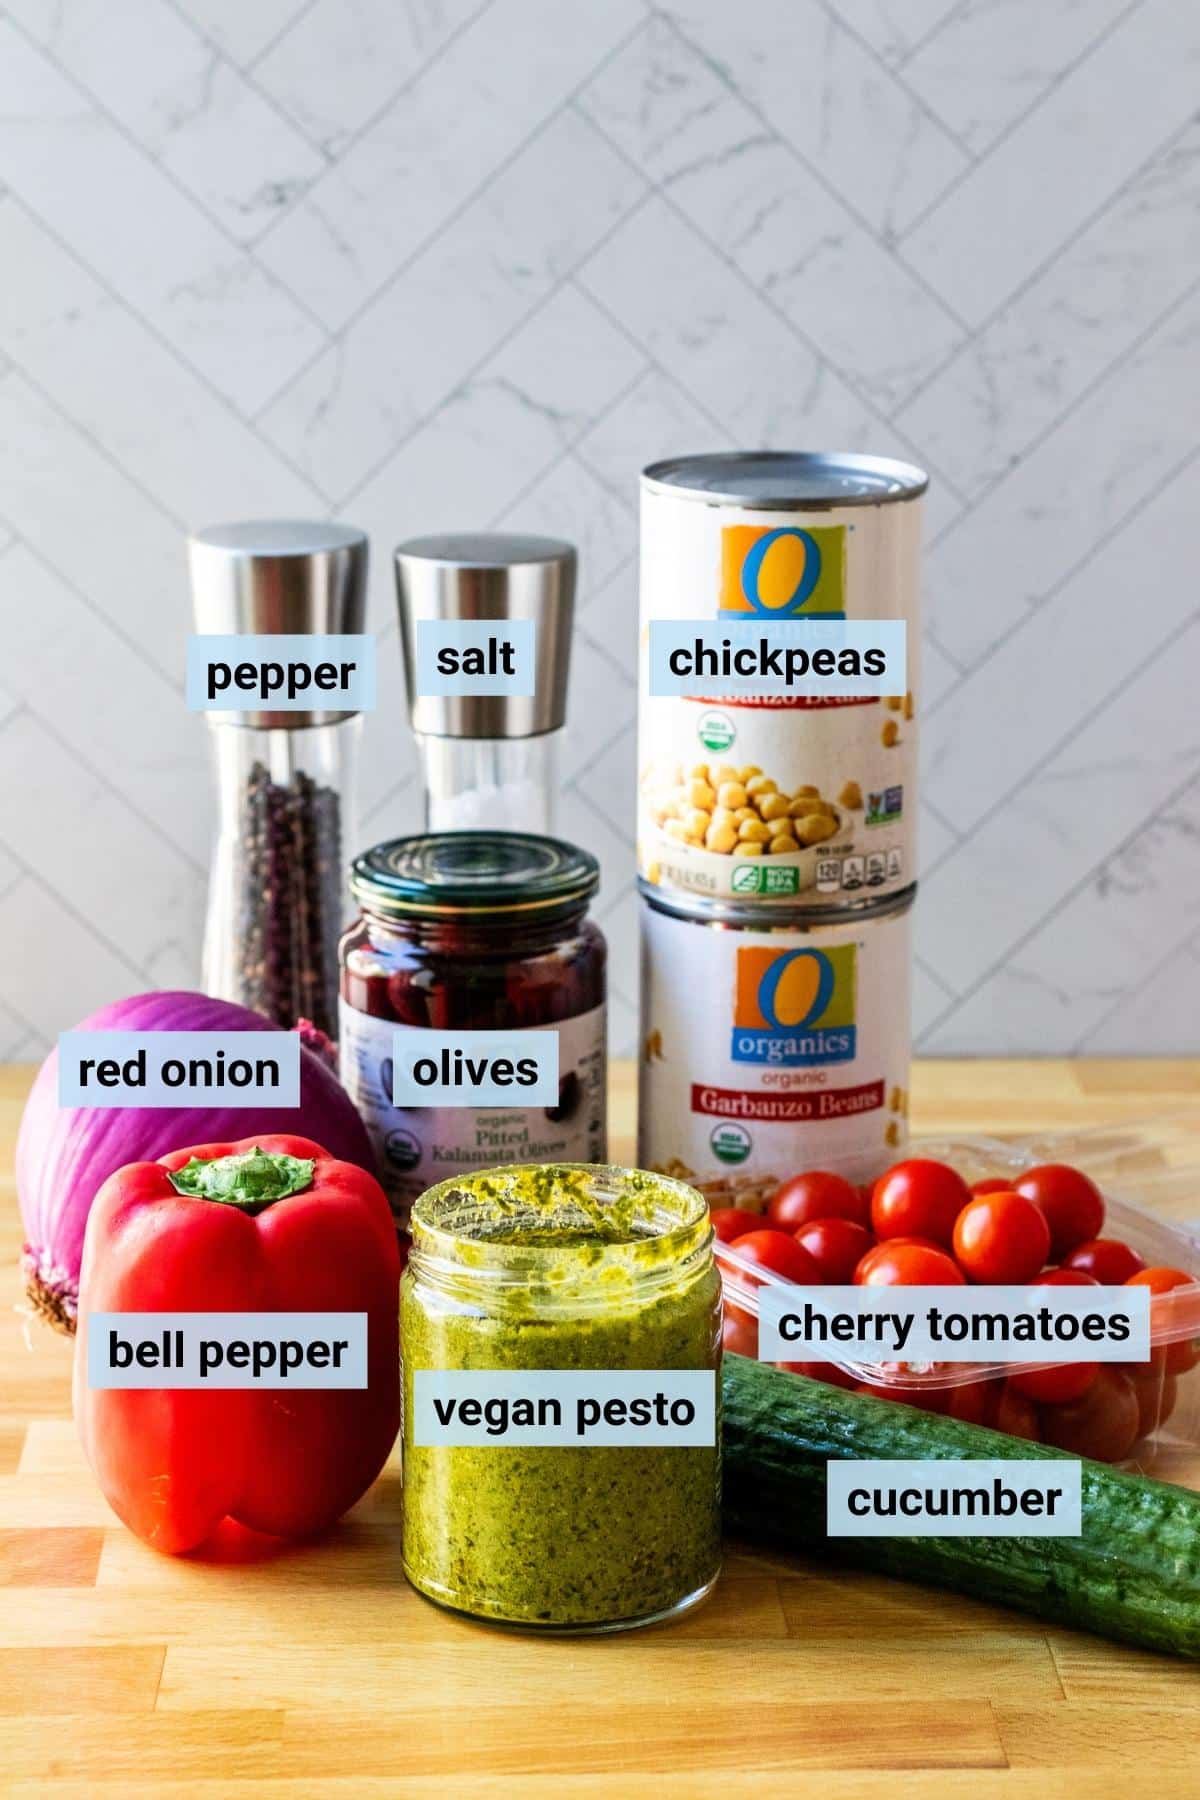 Ingredients needed to make this recipe: cans of chickpeas, cherry tomatoes, cucumber, vegan pesto sauce, red bell pepper, red onion, Kalamata olives, and salt and pepper.